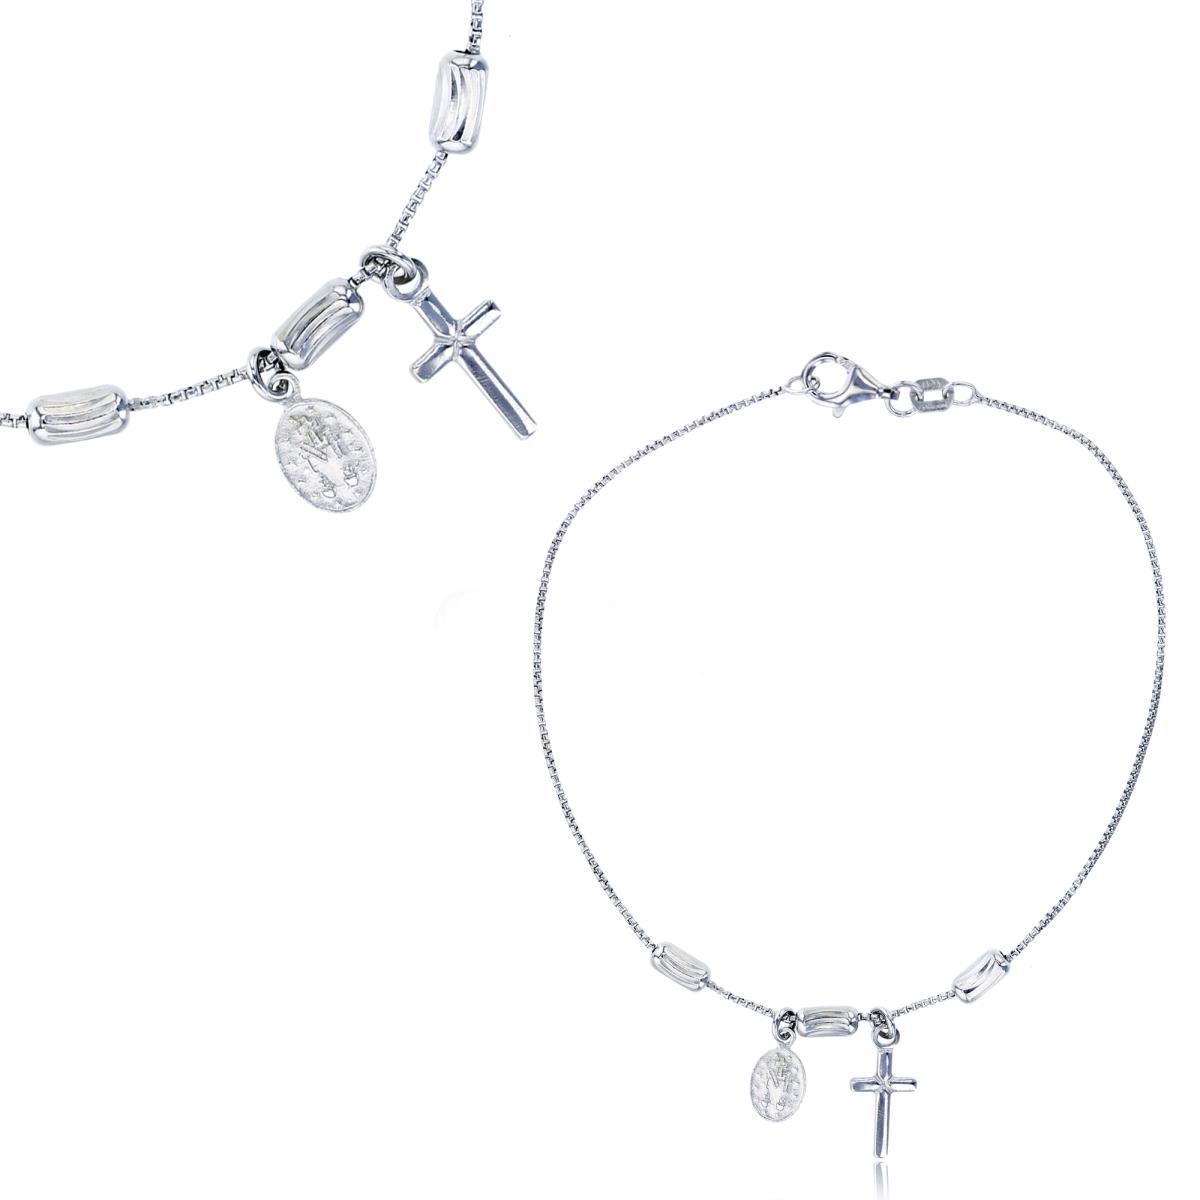 Sterling Silver Rhodium Cross/Virgin Mary Charms /DC Beads 7.25"Chain Bracelet